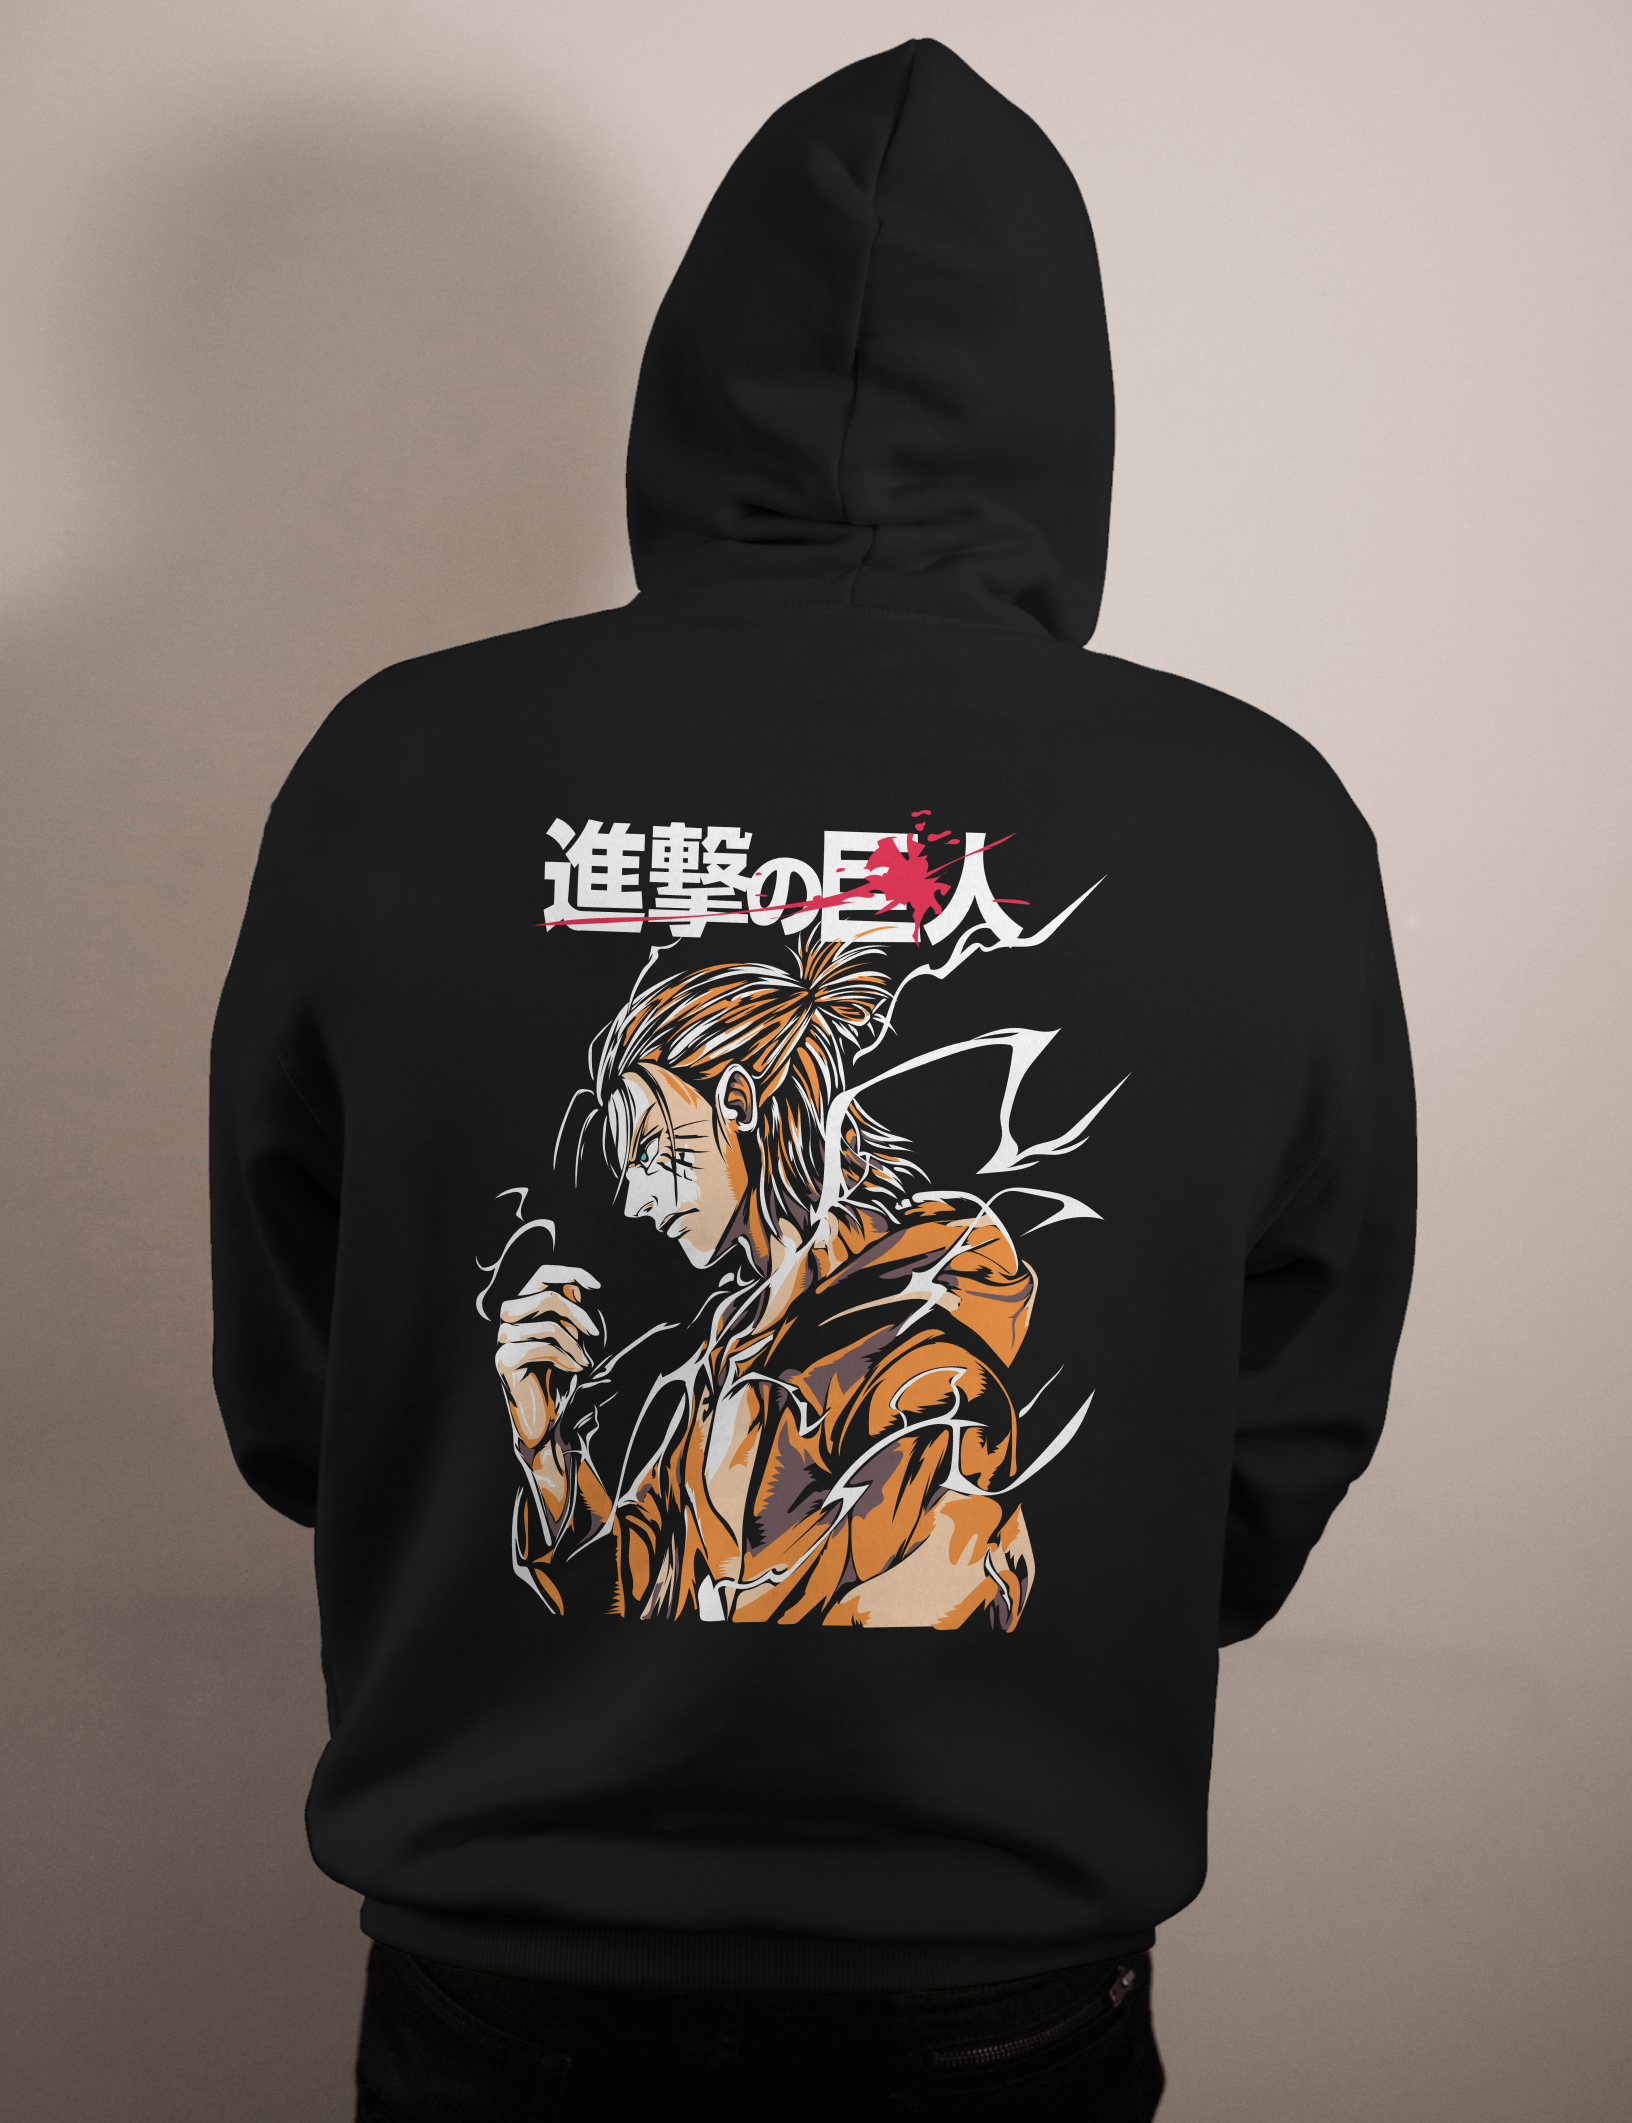 shop and buy attack on titan anime clothing eren yeager hoodie